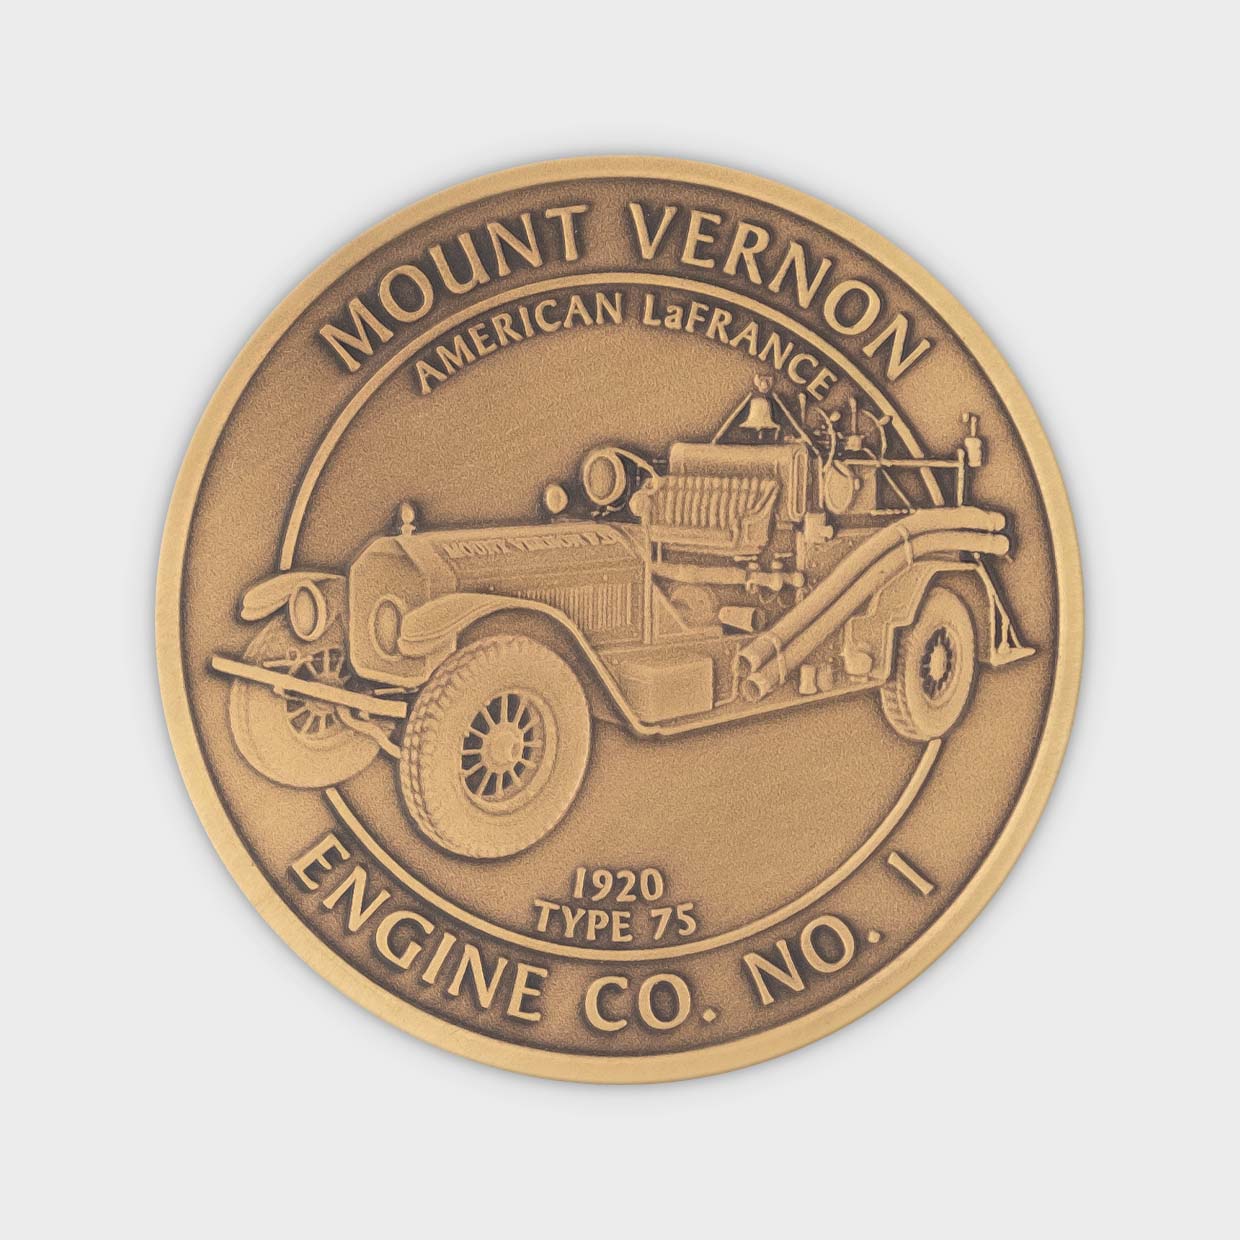 Mount Vernon Skagit County Firefighters Coin Reverse